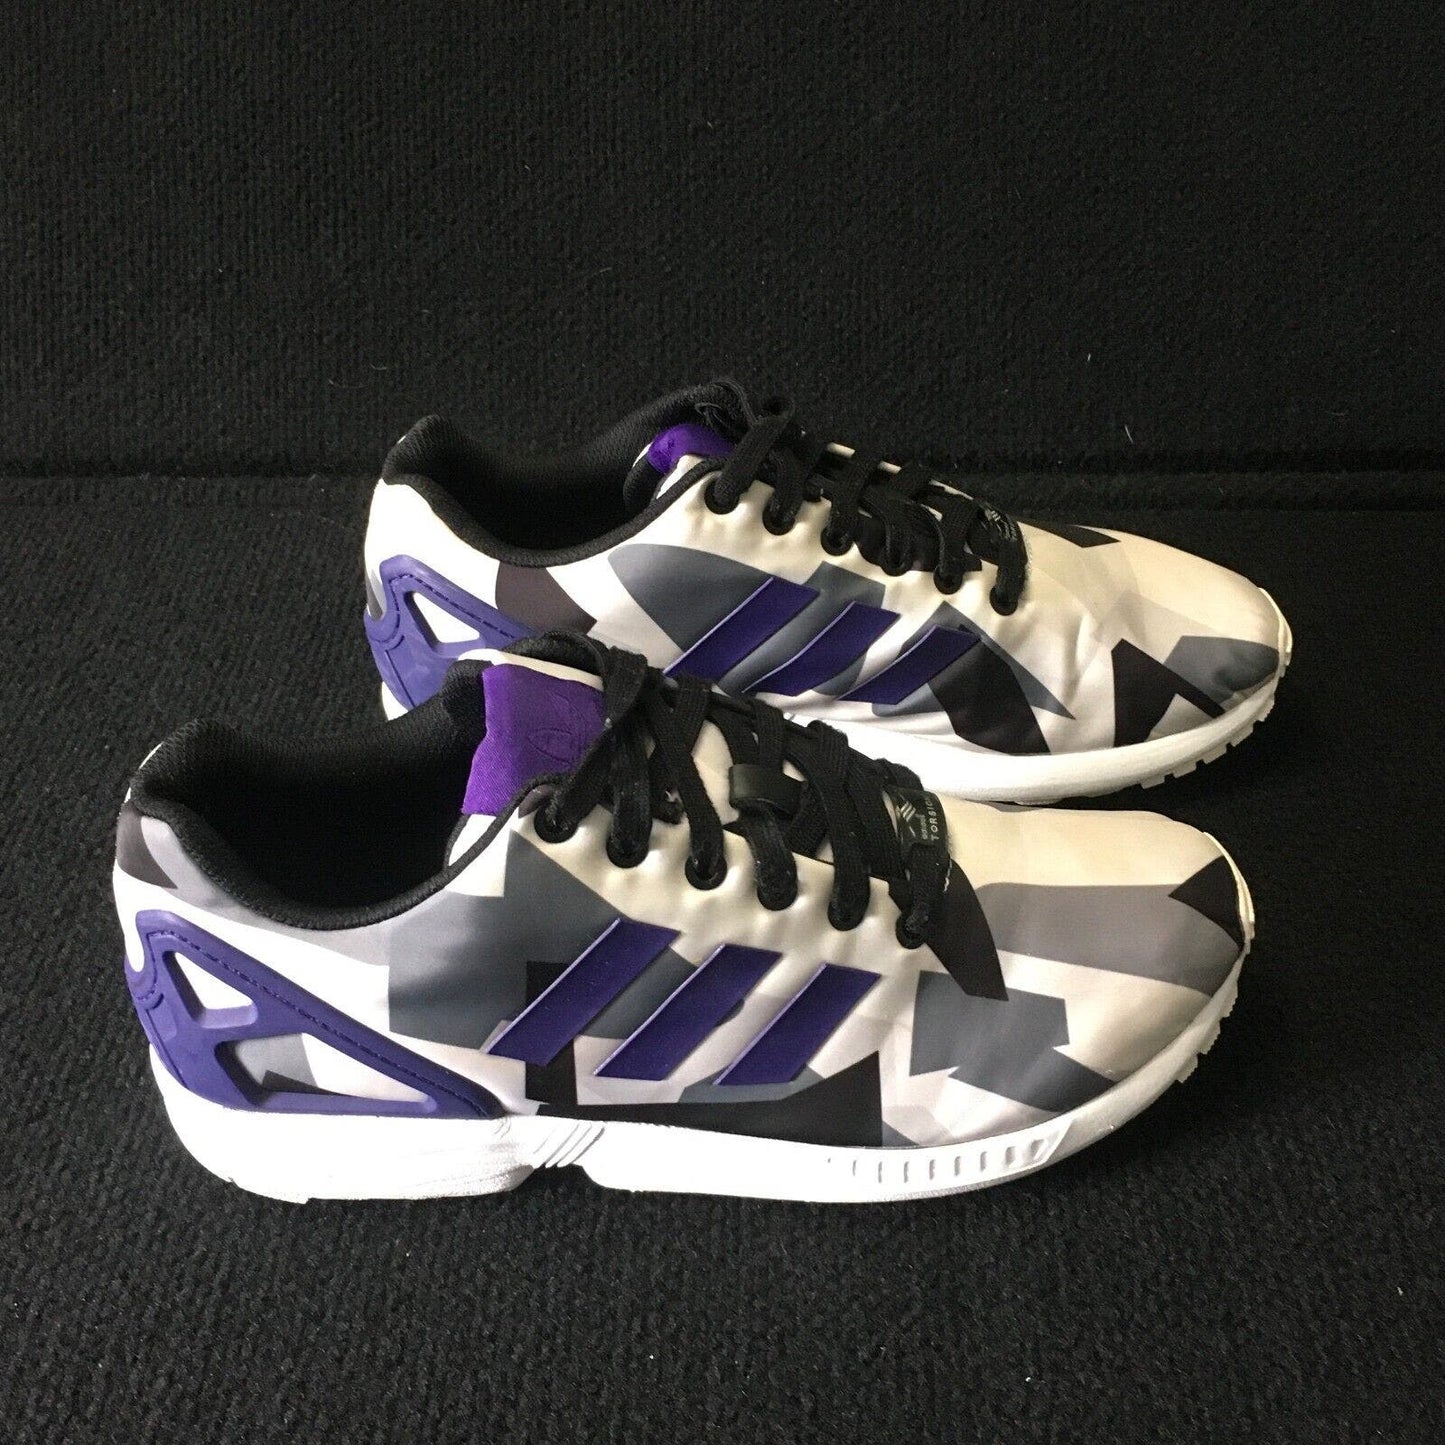 Adidas Mens ZX Flux B34517 White Purple Lace Up Low Top Running Shoes Size 8.5